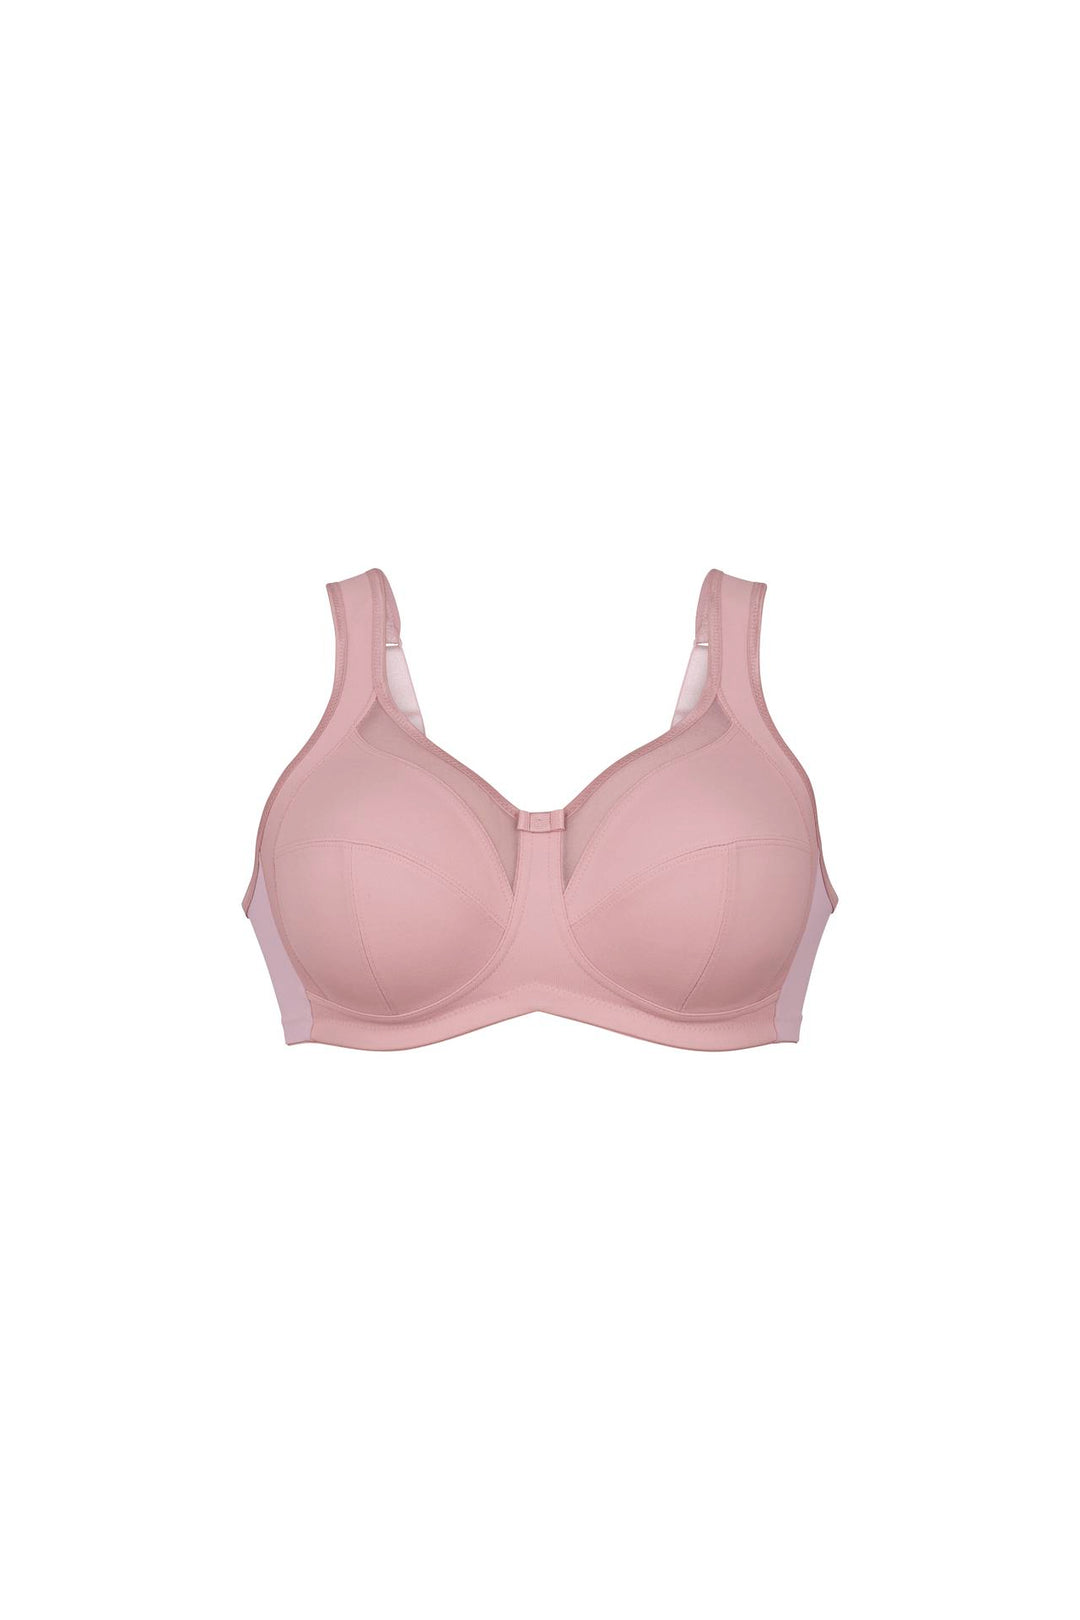 No. 1 SELLING non-wired bra with wide comfort straps CLARA ROSA 